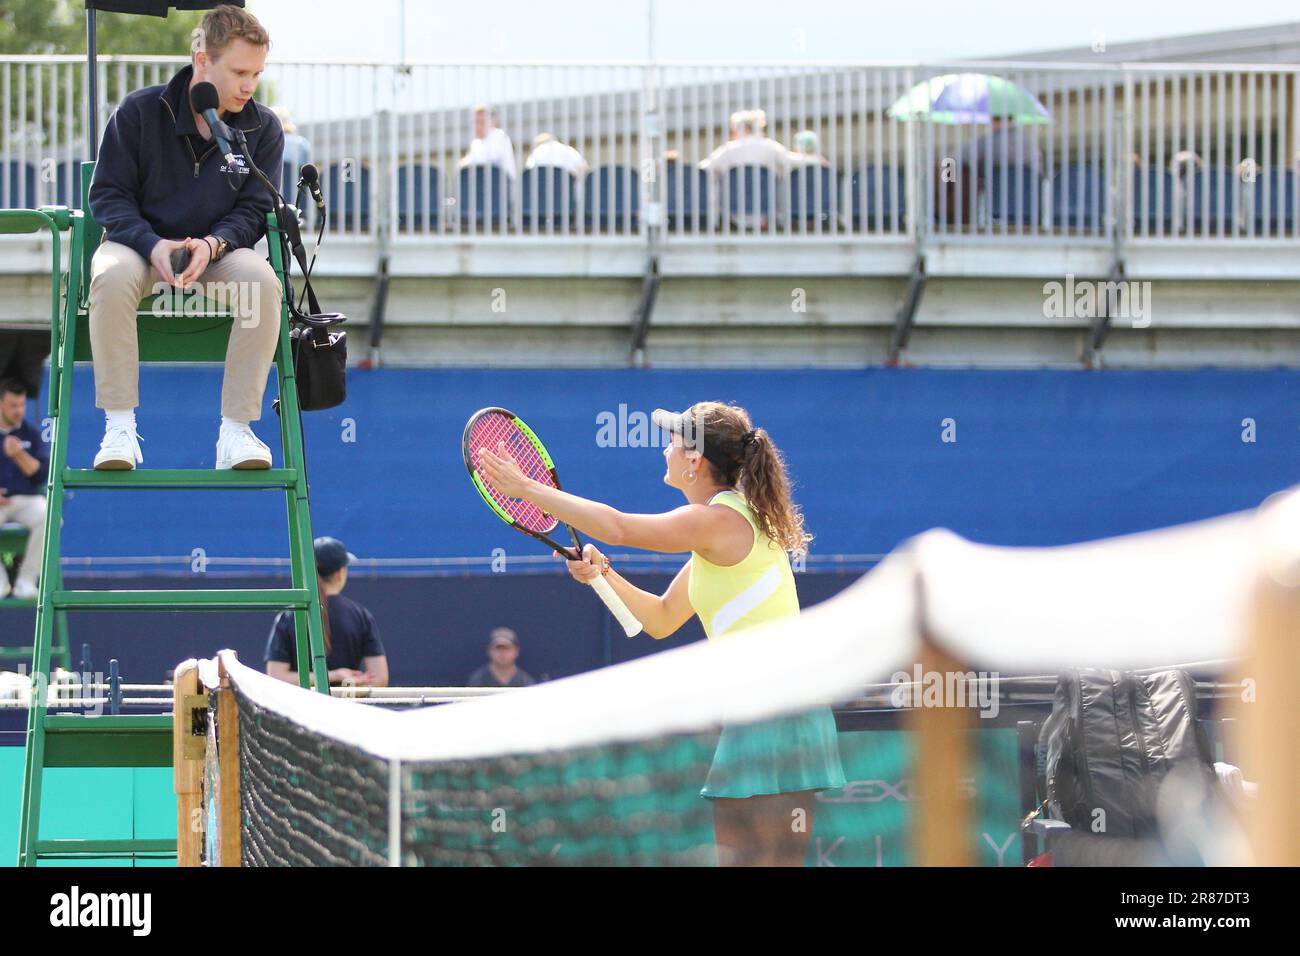 Ilkley, UK. 19th June, 2023. Ilkley Tennis Club, England, June 19th 2023: Jesika Maleckova challenges a call during the W100 Ilkley against Harmony Tan at Ilkley Tennis Club (Sean Chandler/SPP) Credit: SPP Sport Press Photo. /Alamy Live News Stock Photo